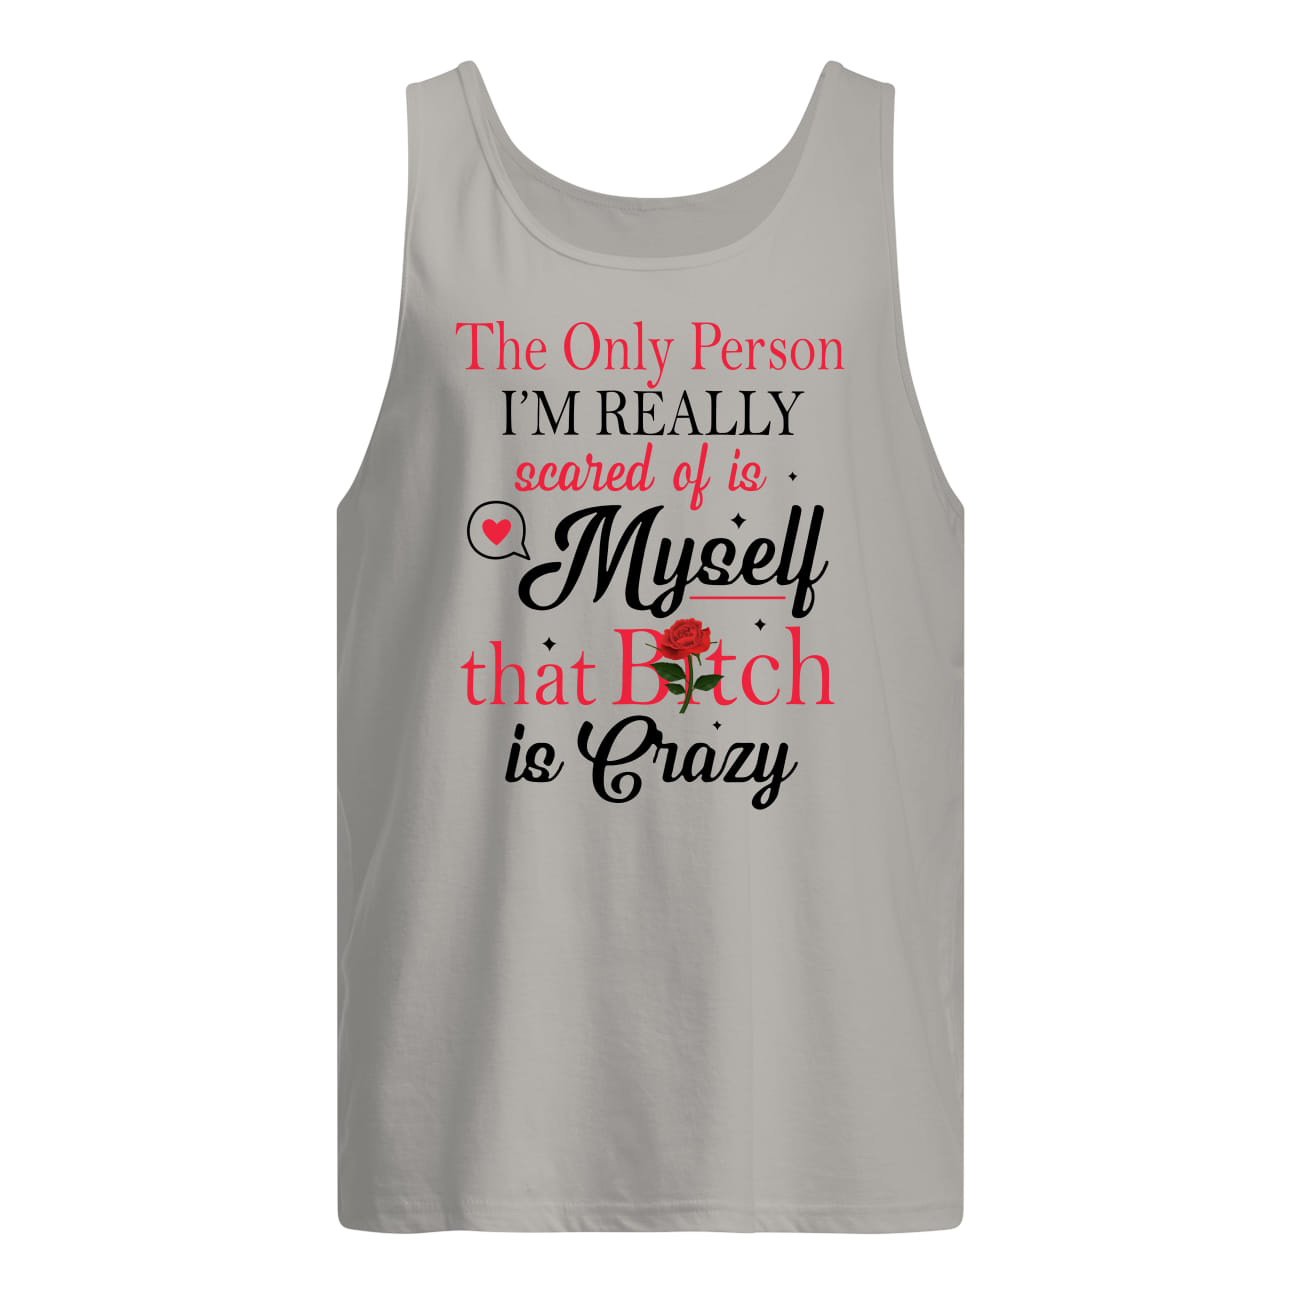 The only person I'm really scared of is myself that bitch is crazy tank top